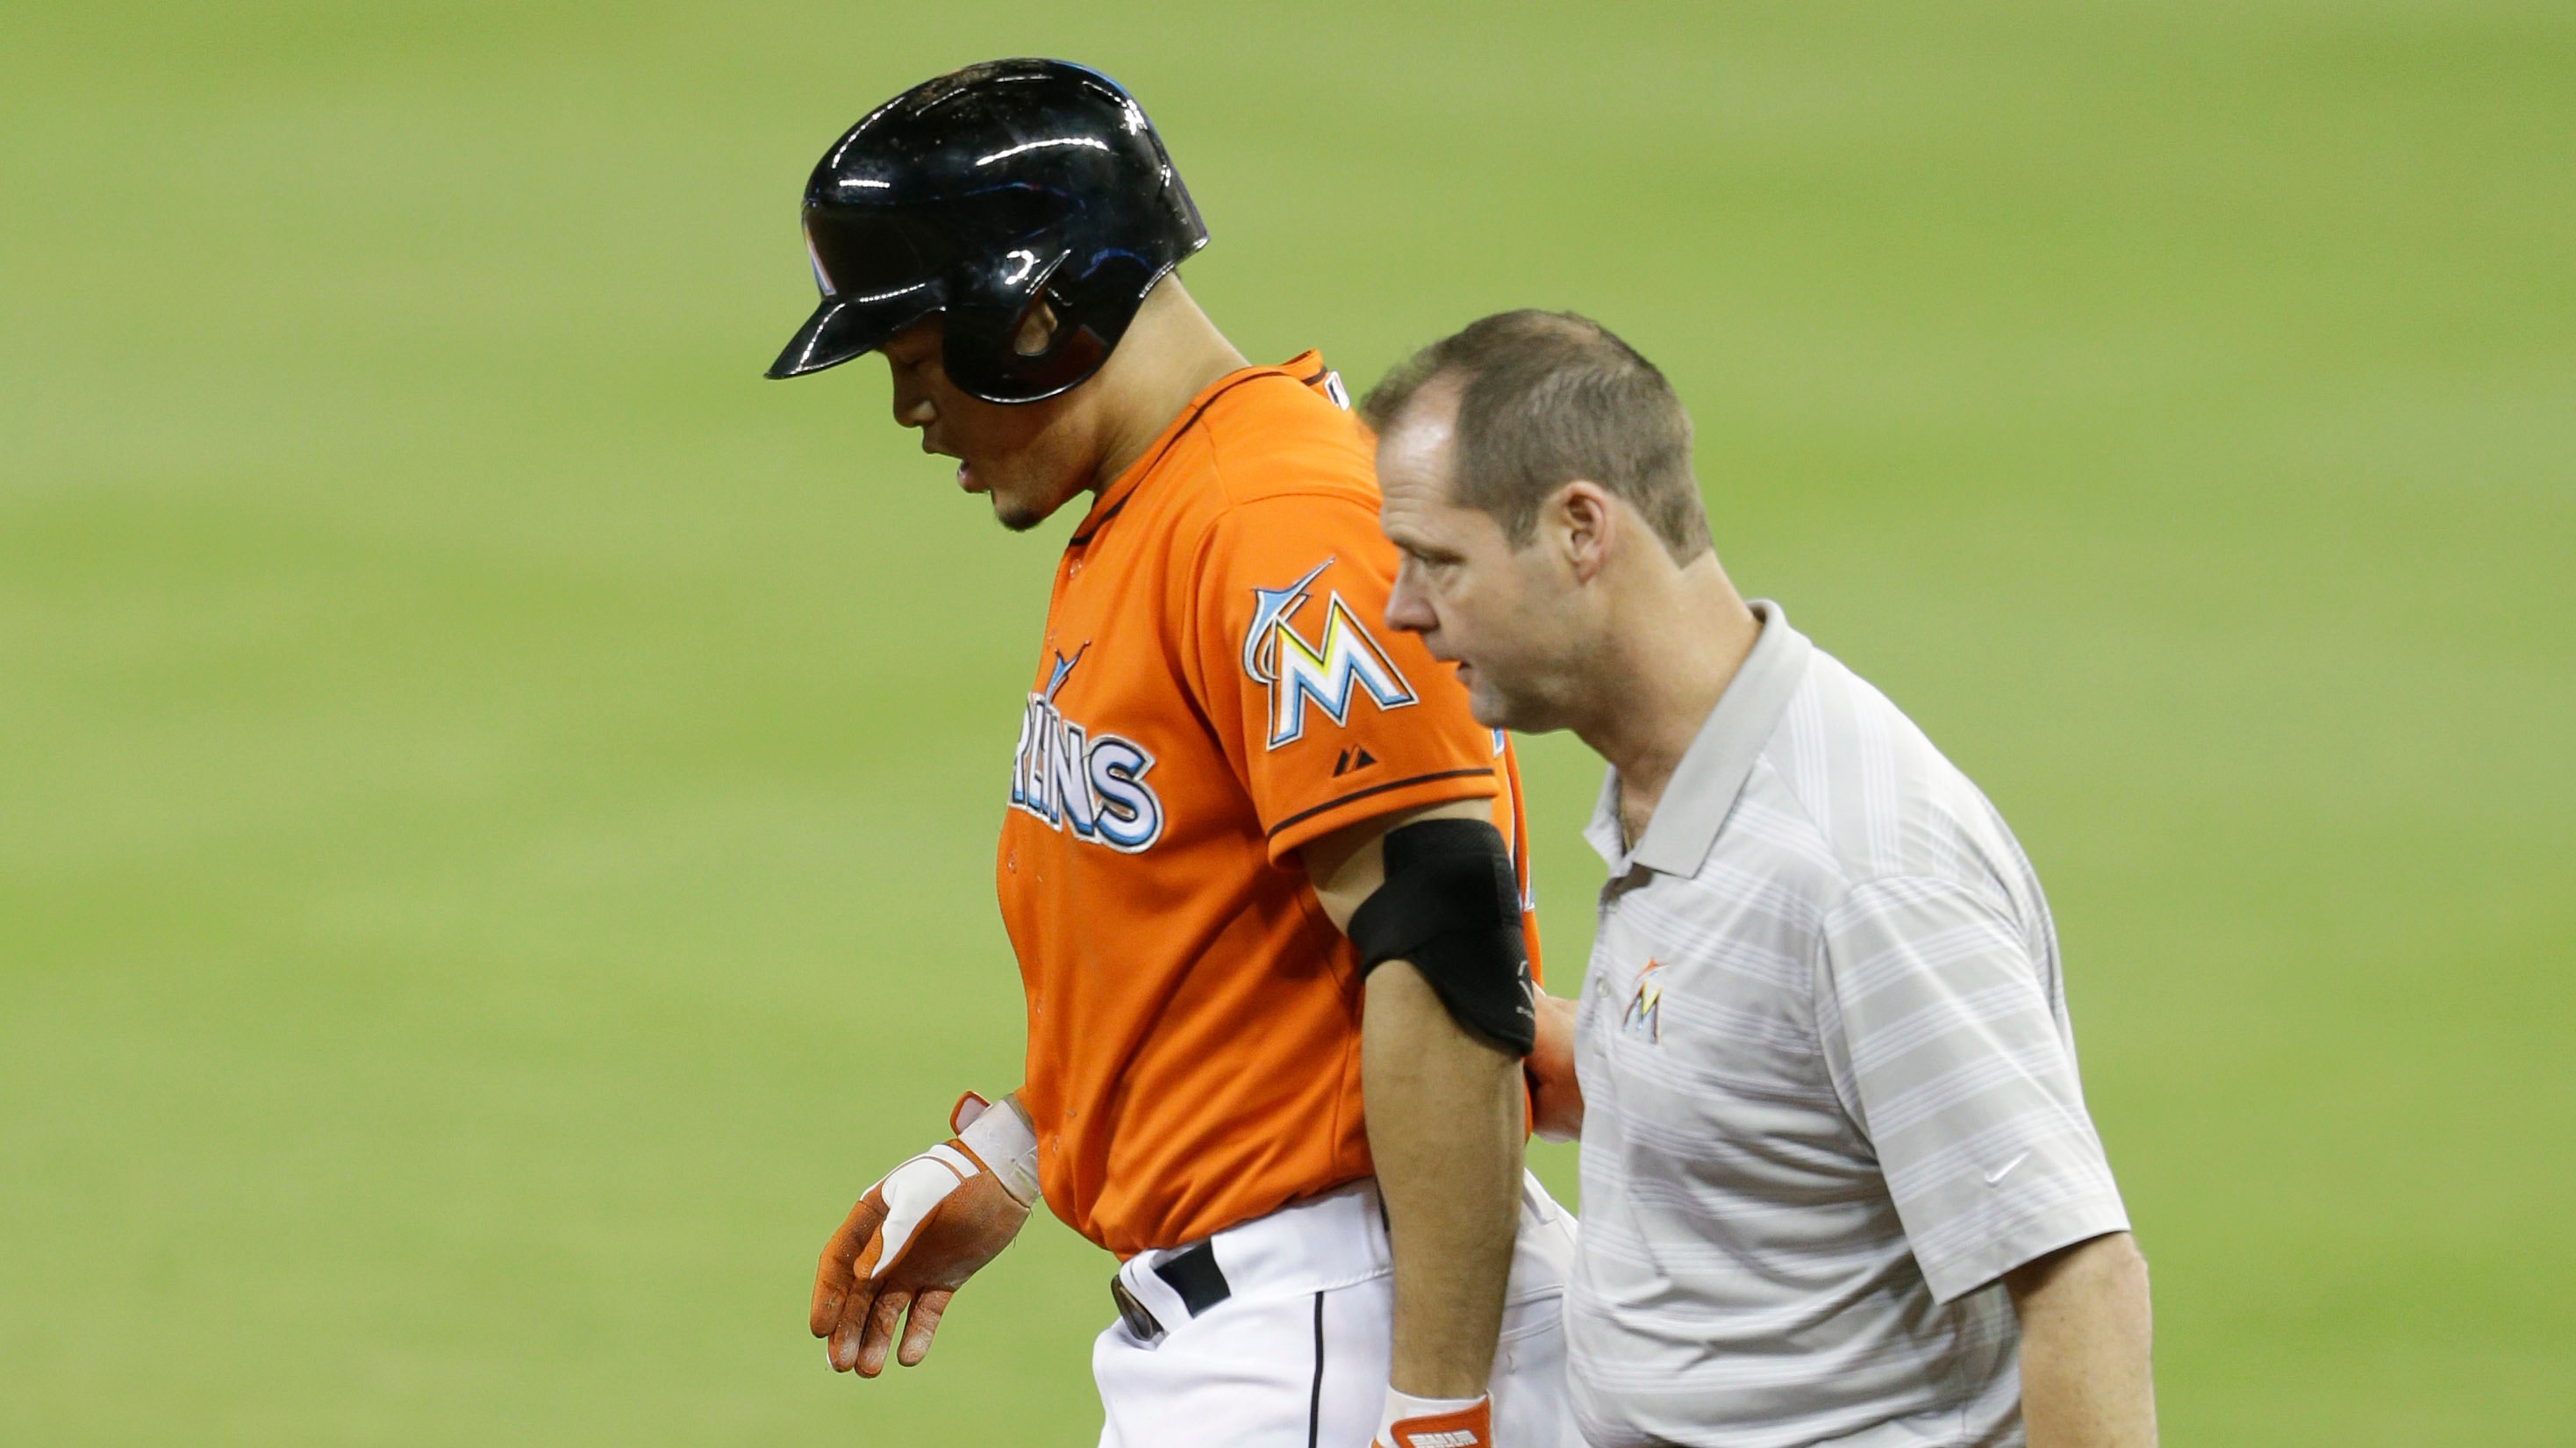 Marlins' Giancarlo Stanton says he won't be changed by injury